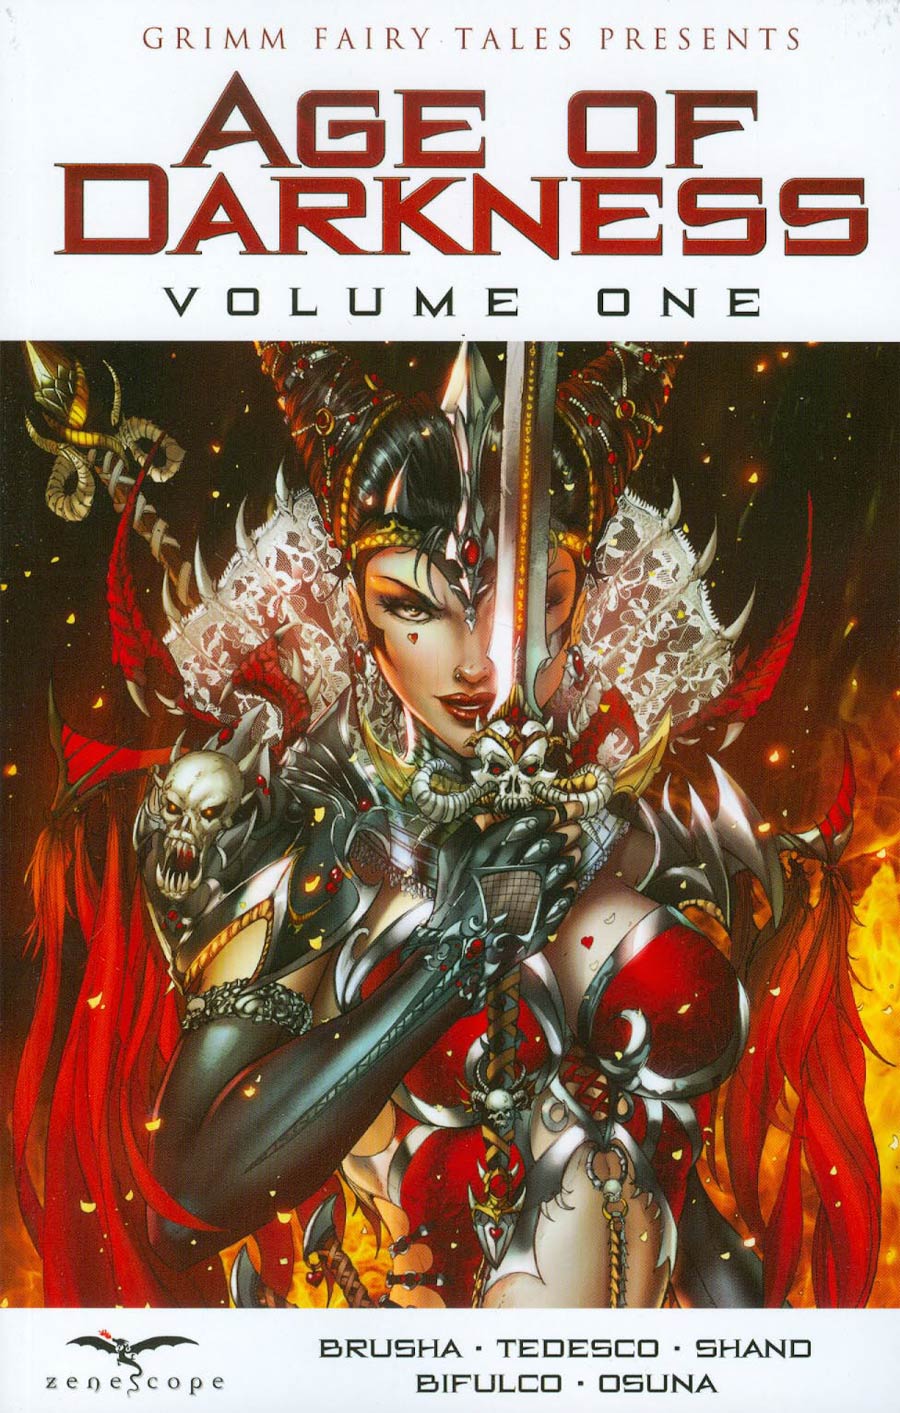 Grimm Fairy Tales Presents Age Of Darkness Vol 1 TP